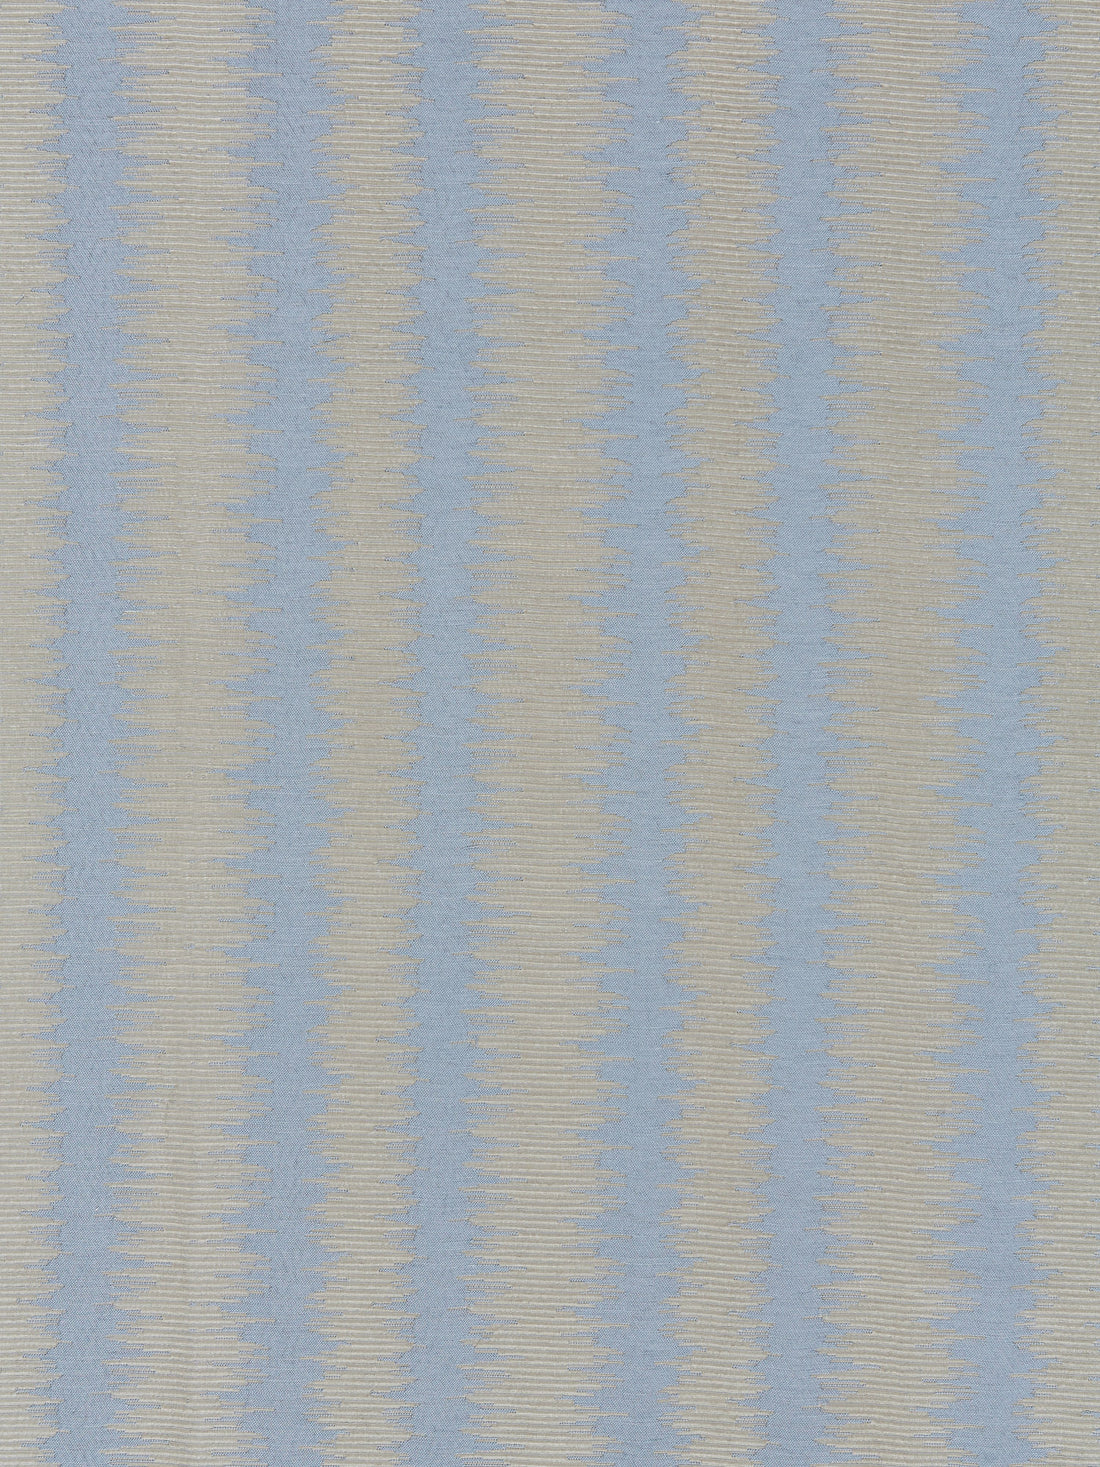 Konya Ikat Stripe fabric in bluestone color - pattern number SC 000327138 - by Scalamandre in the Scalamandre Fabrics Book 1 collection